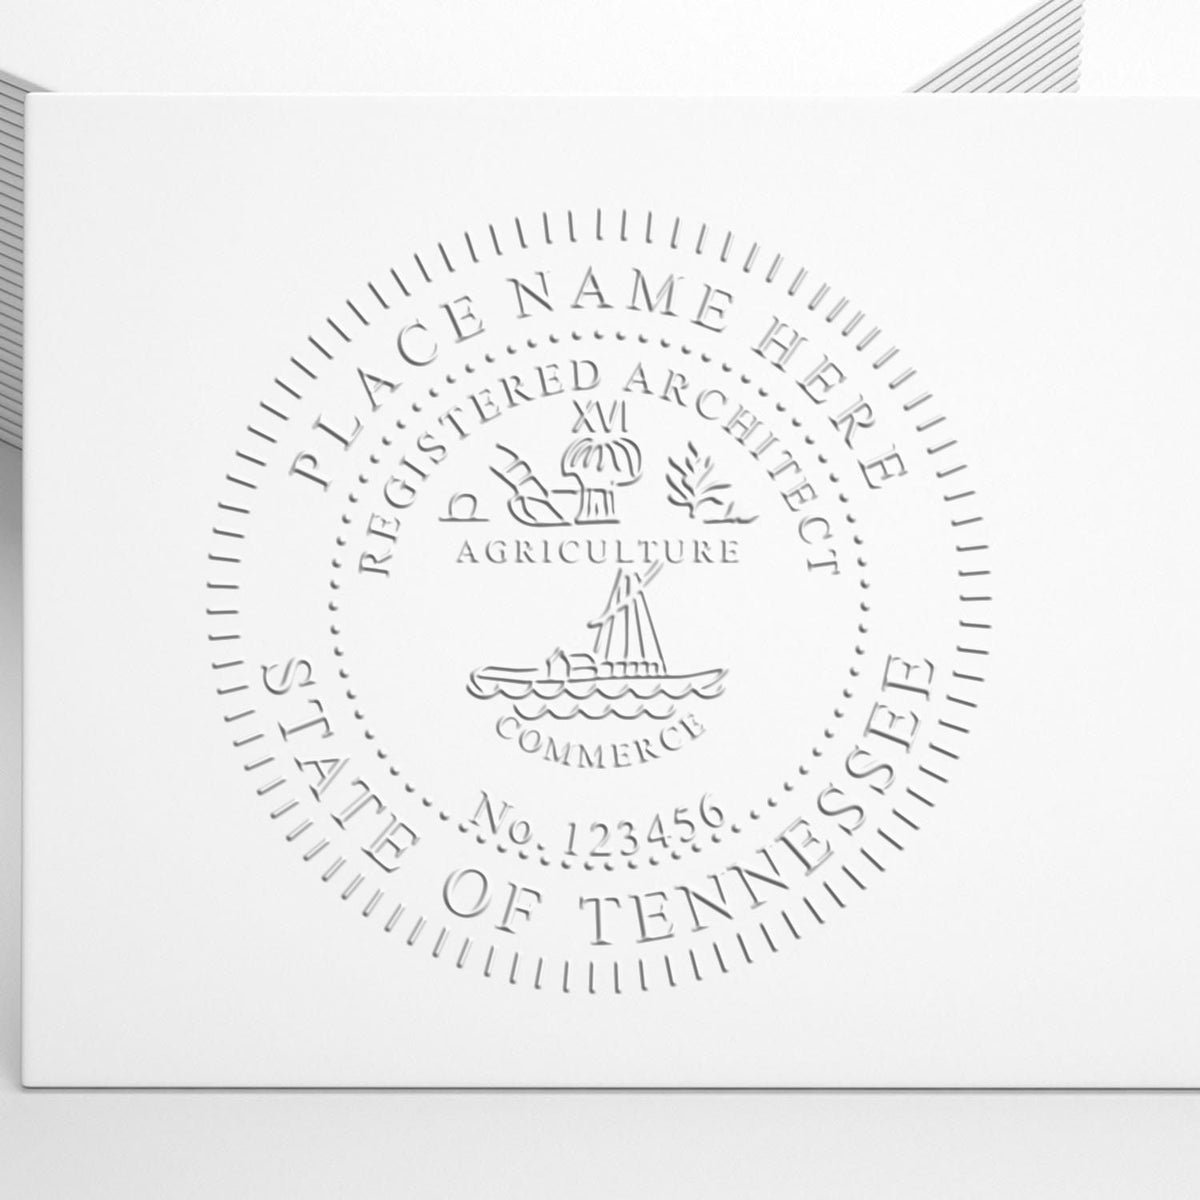 An alternative view of the State of Tennessee Long Reach Architectural Embossing Seal stamped on a sheet of paper showing the image in use